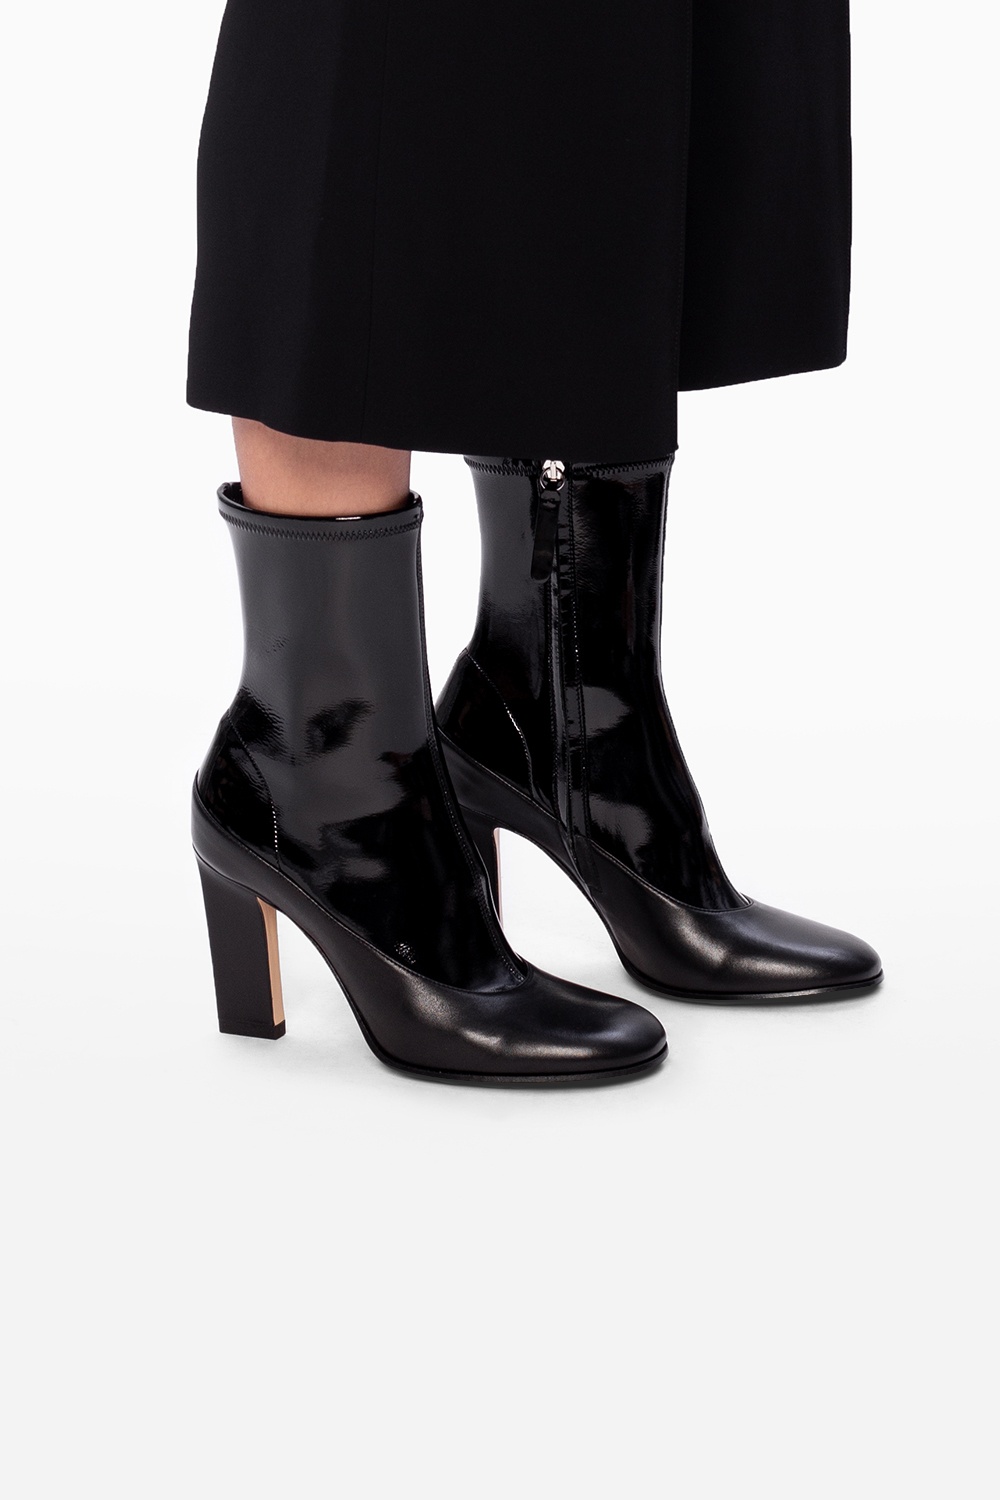 Wandler ‘Lesly’ heeled ankle boots